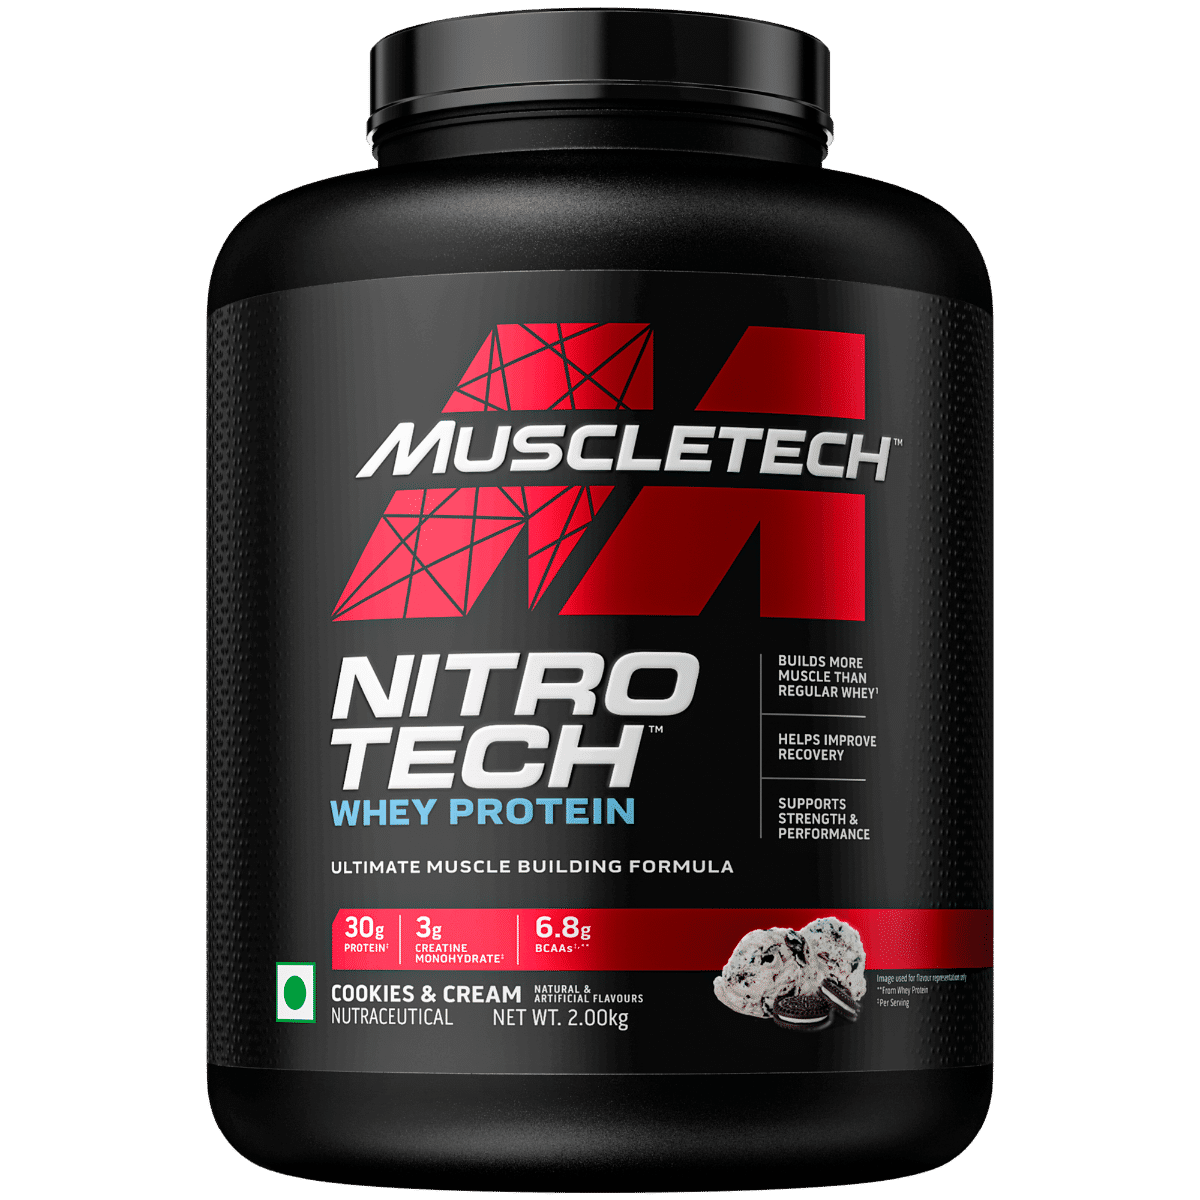 Buy Muscletech Nitrotech Whey Protein Cookies & Cream Flavour Powder, 2 kg Online